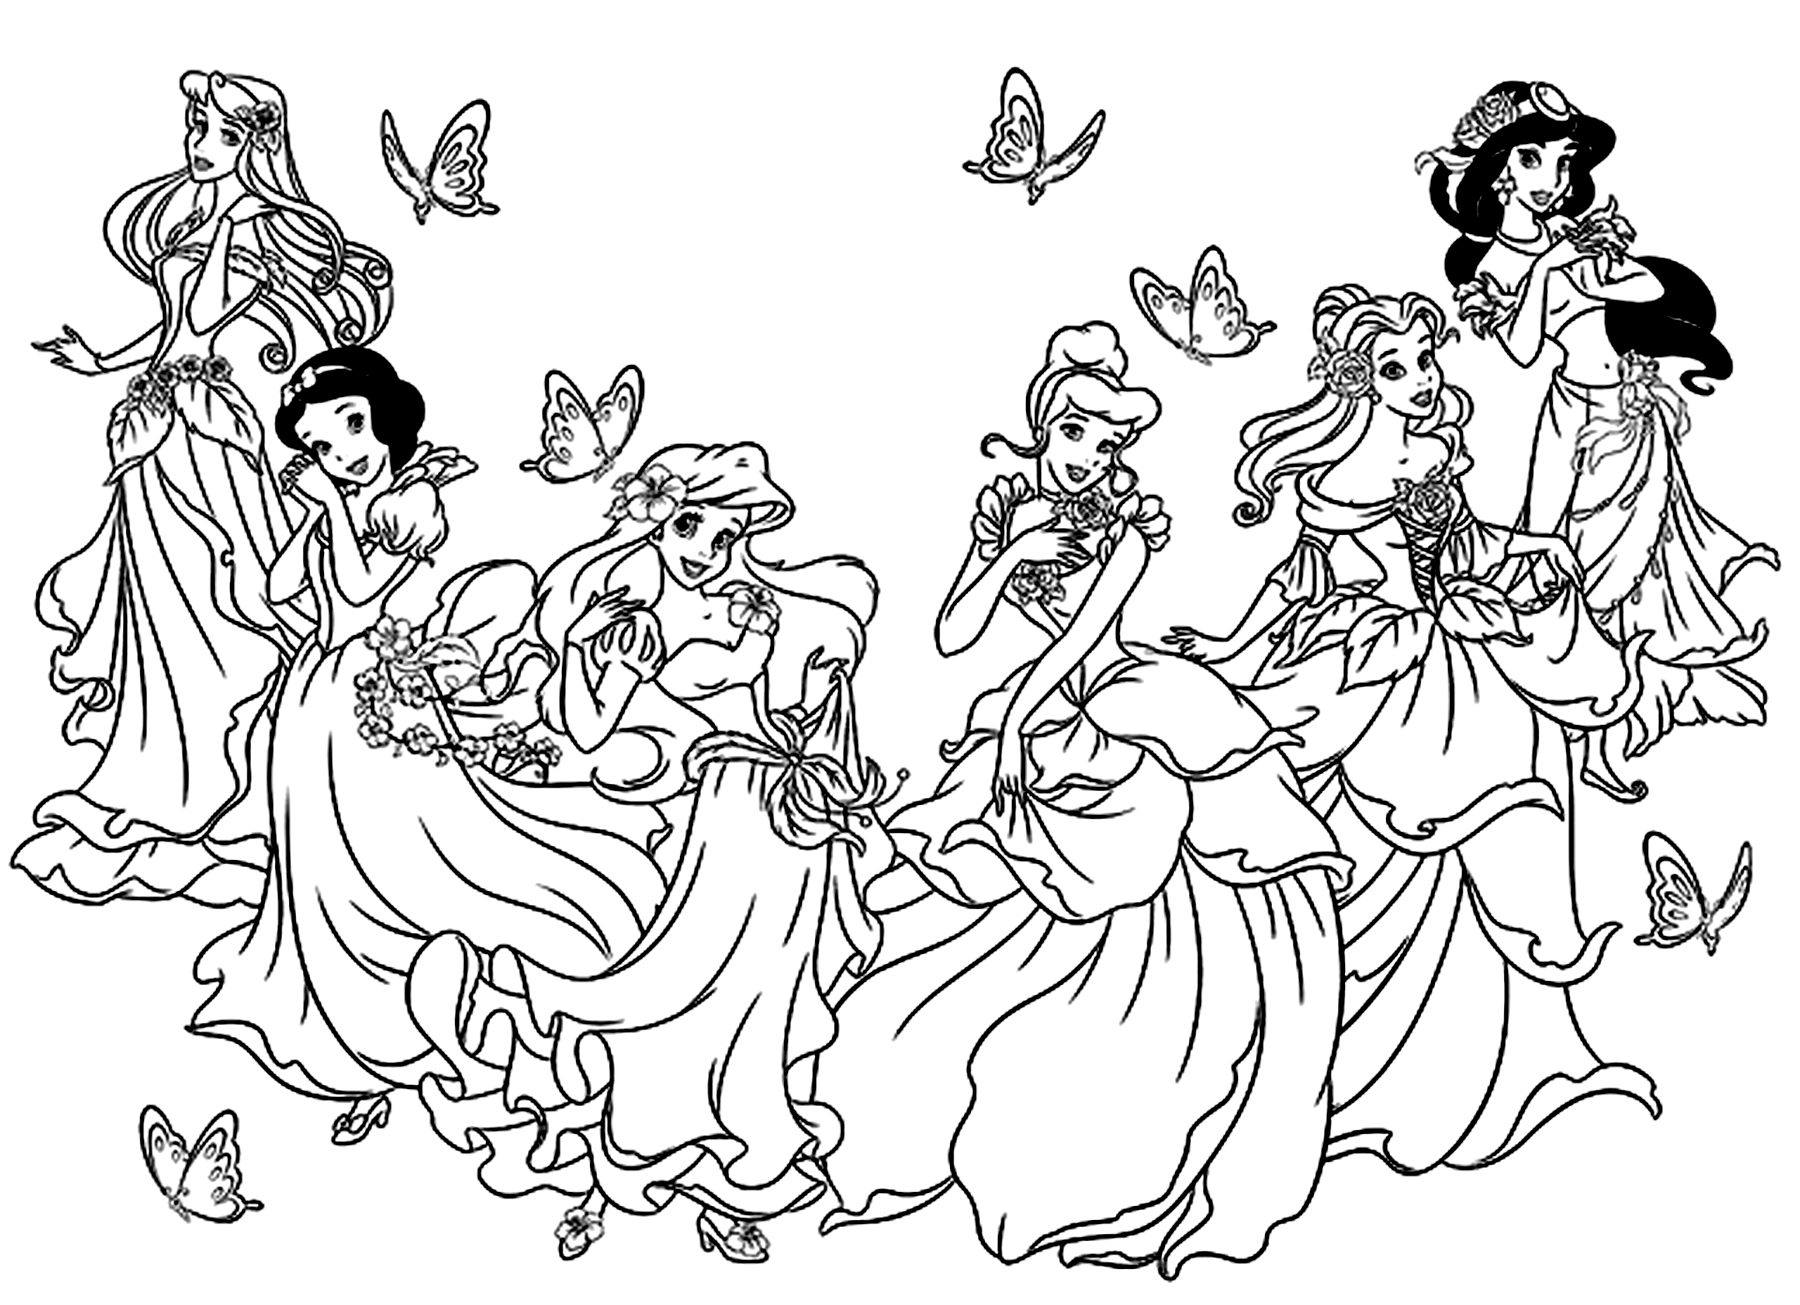 all-the-disney-princesses-return-to-childhood-adult-coloring-pages